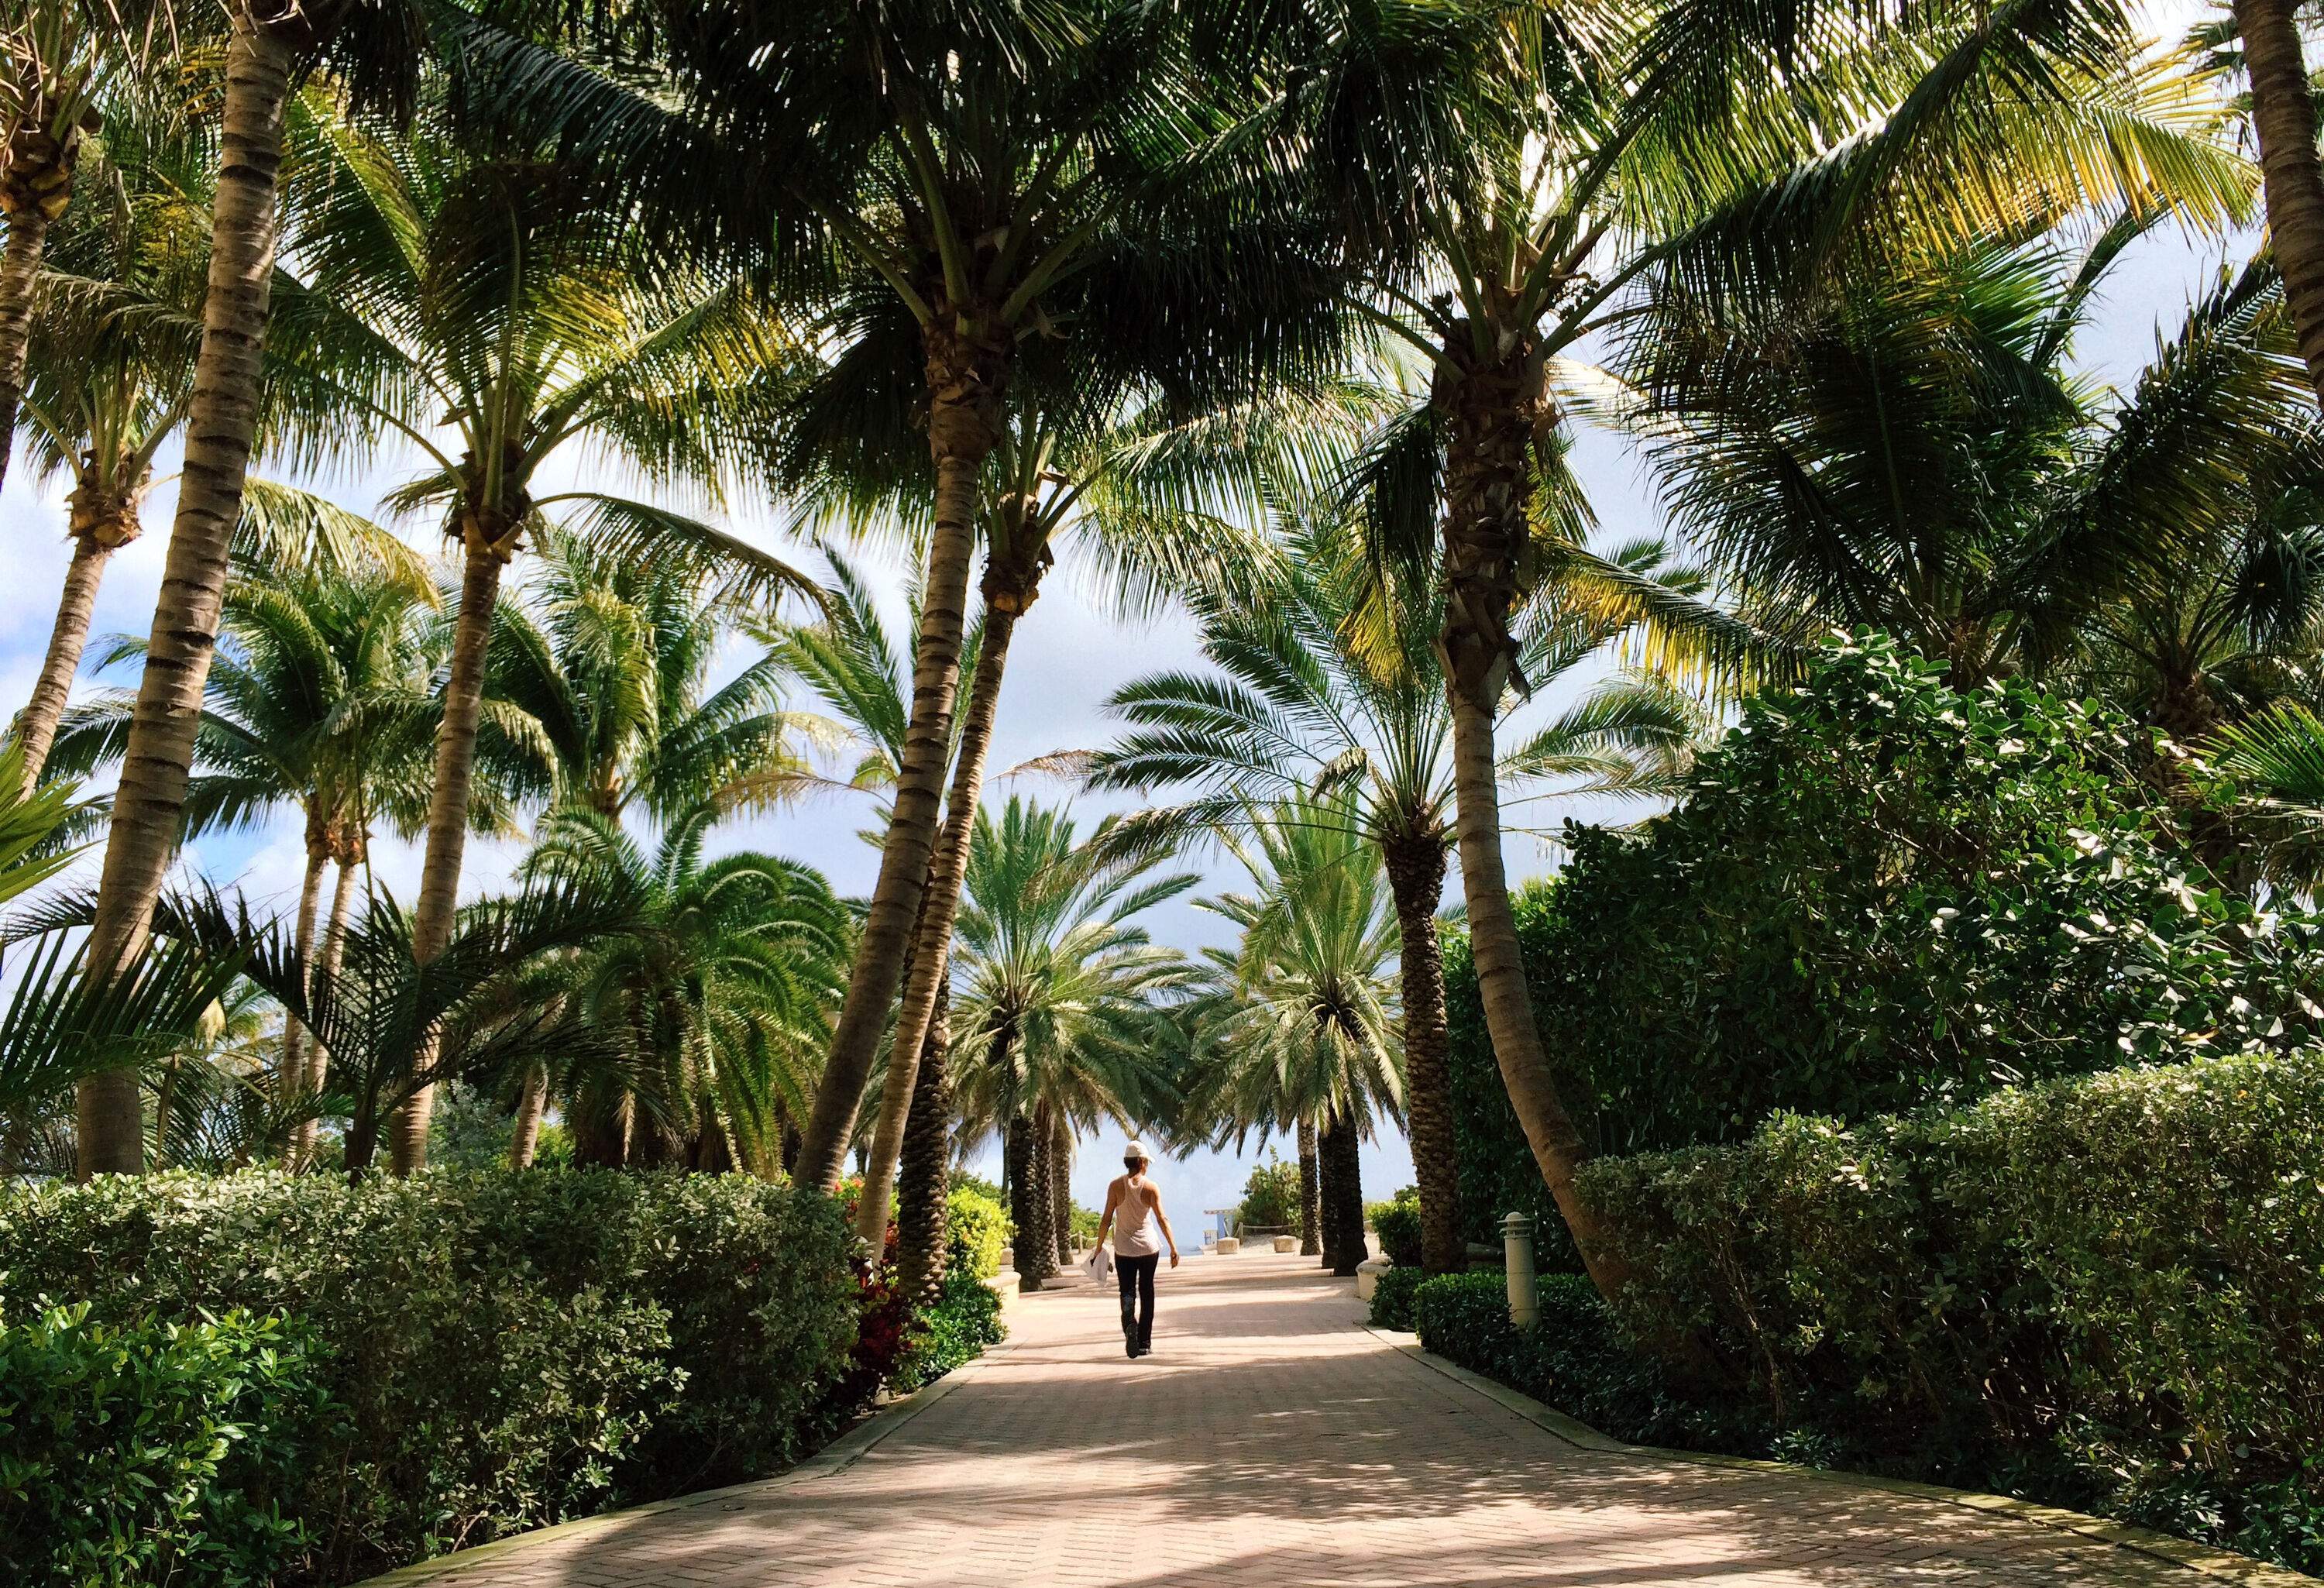 A woman walks on the cobbled path in the middle of the green plants under the palm trees.